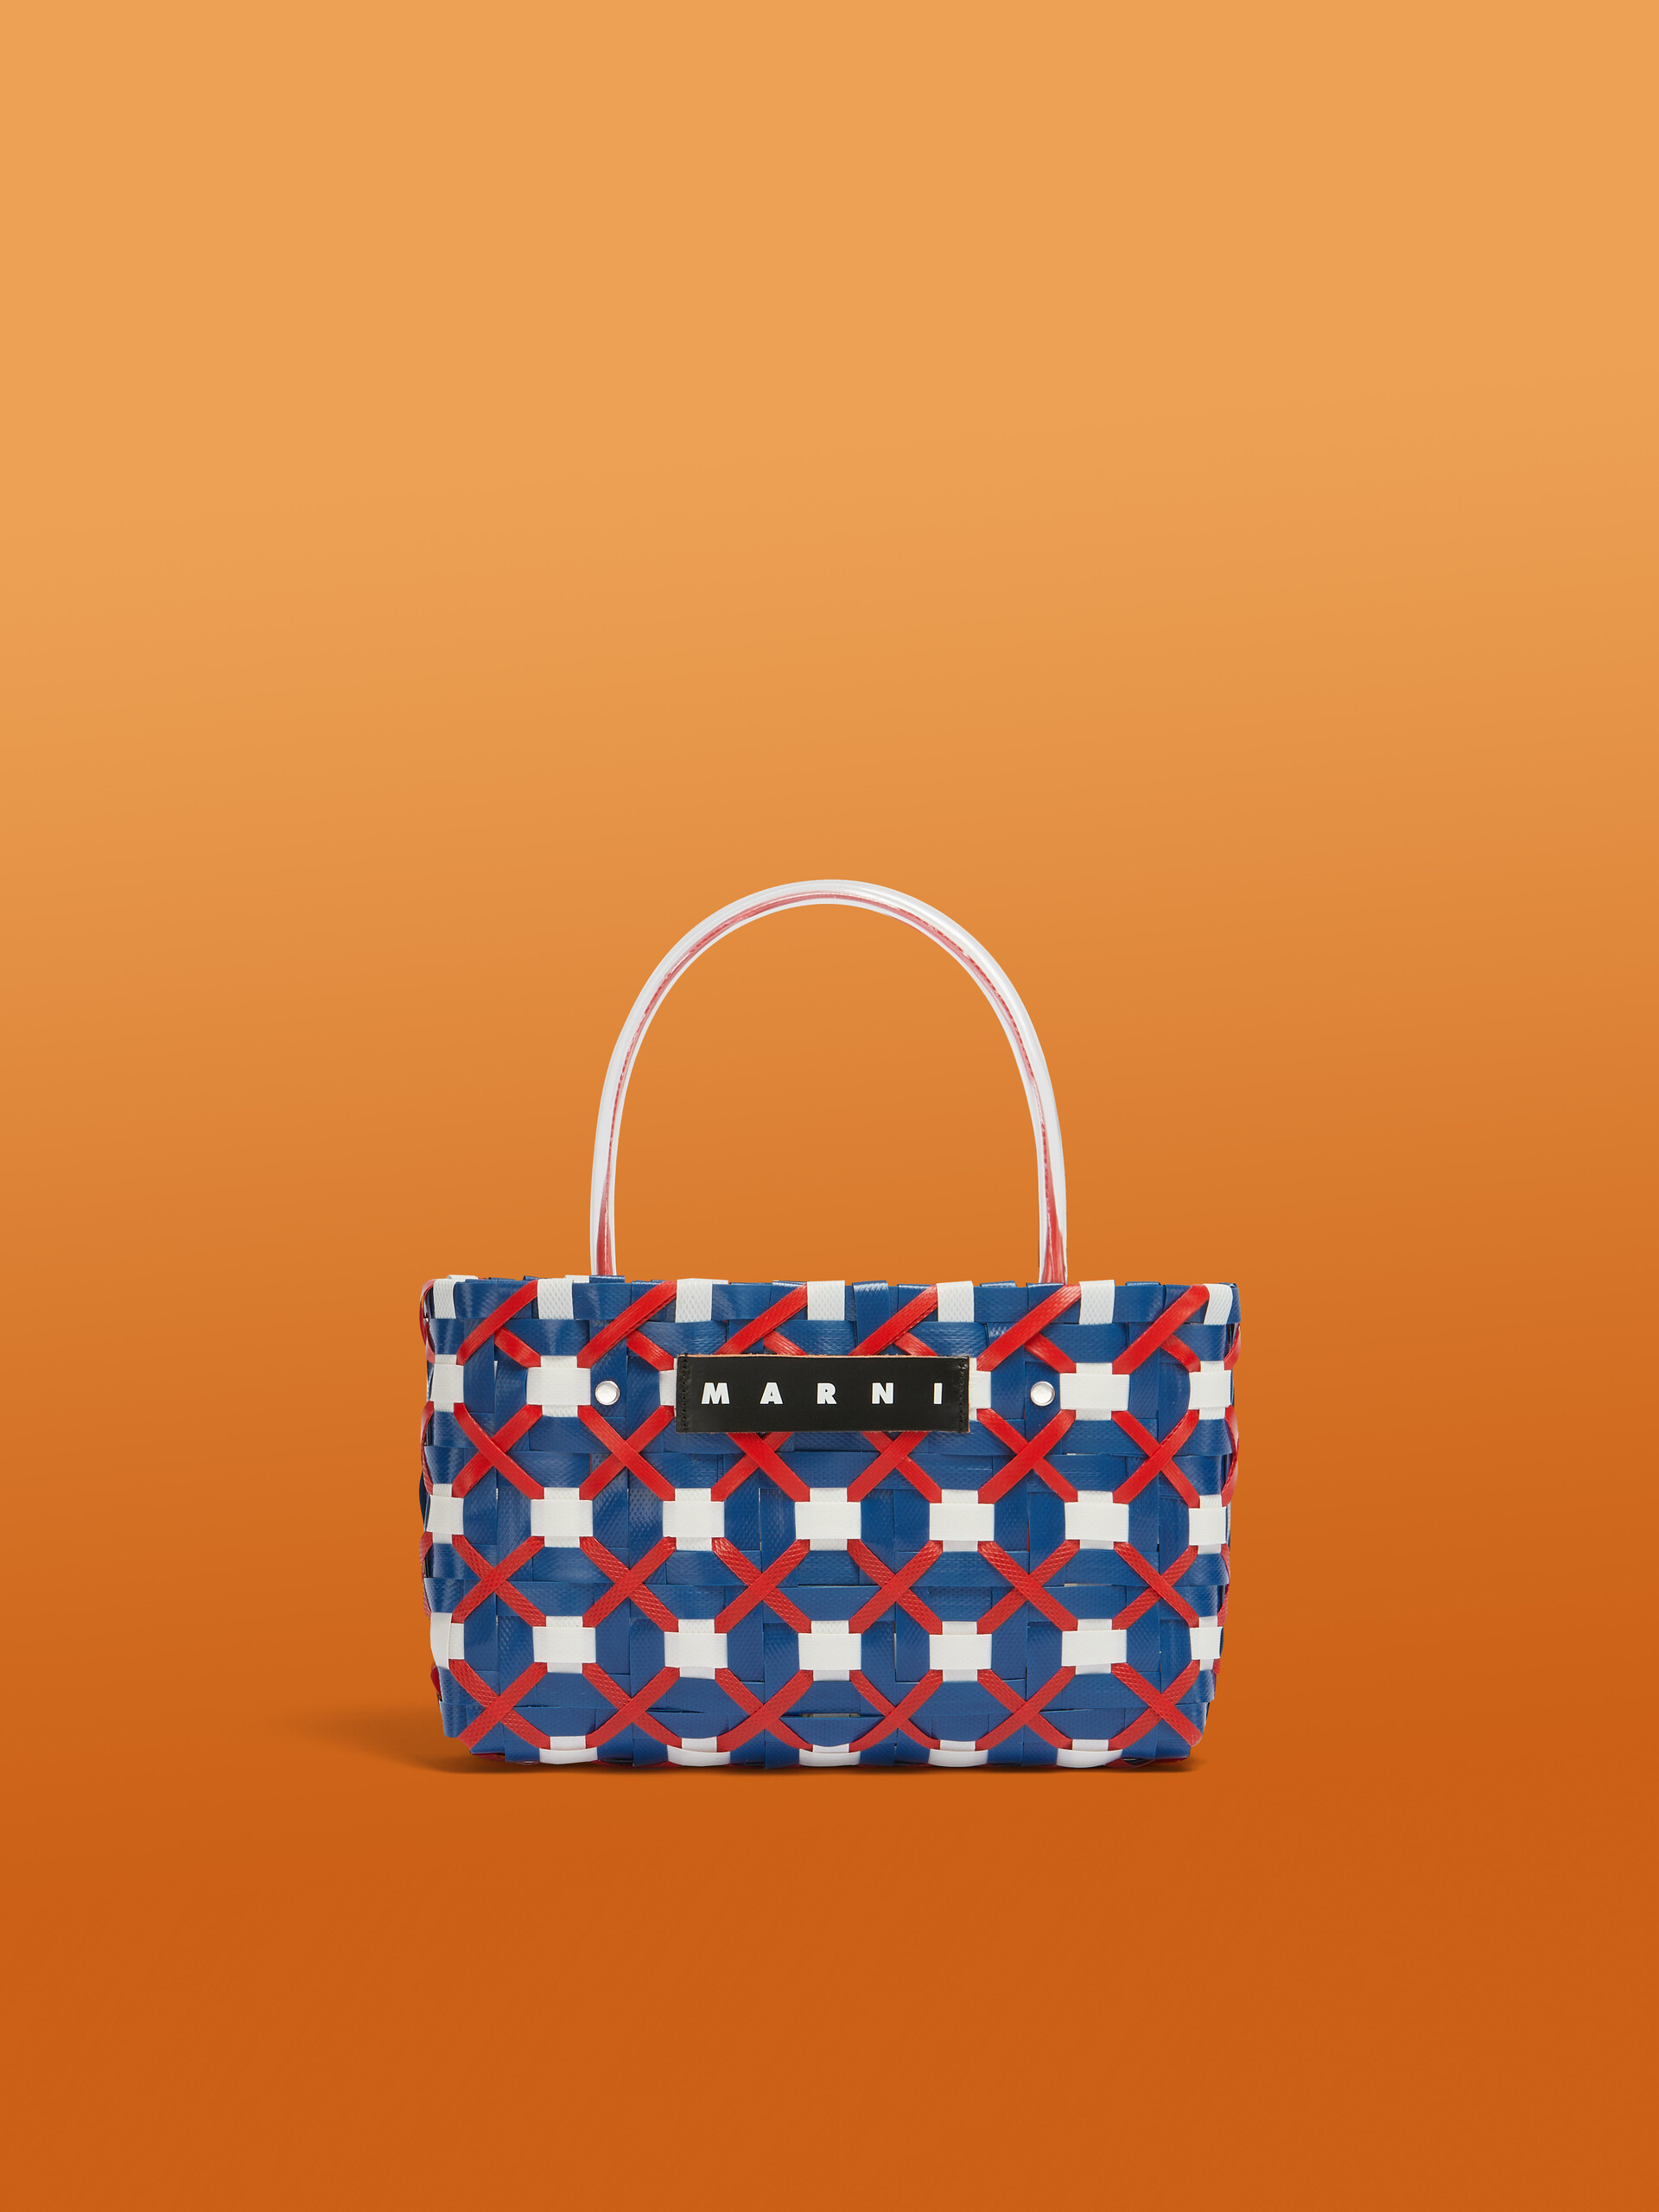 Blue and white criss-cross MARNI MARKET tote bag - Shopping Bags - Image 1